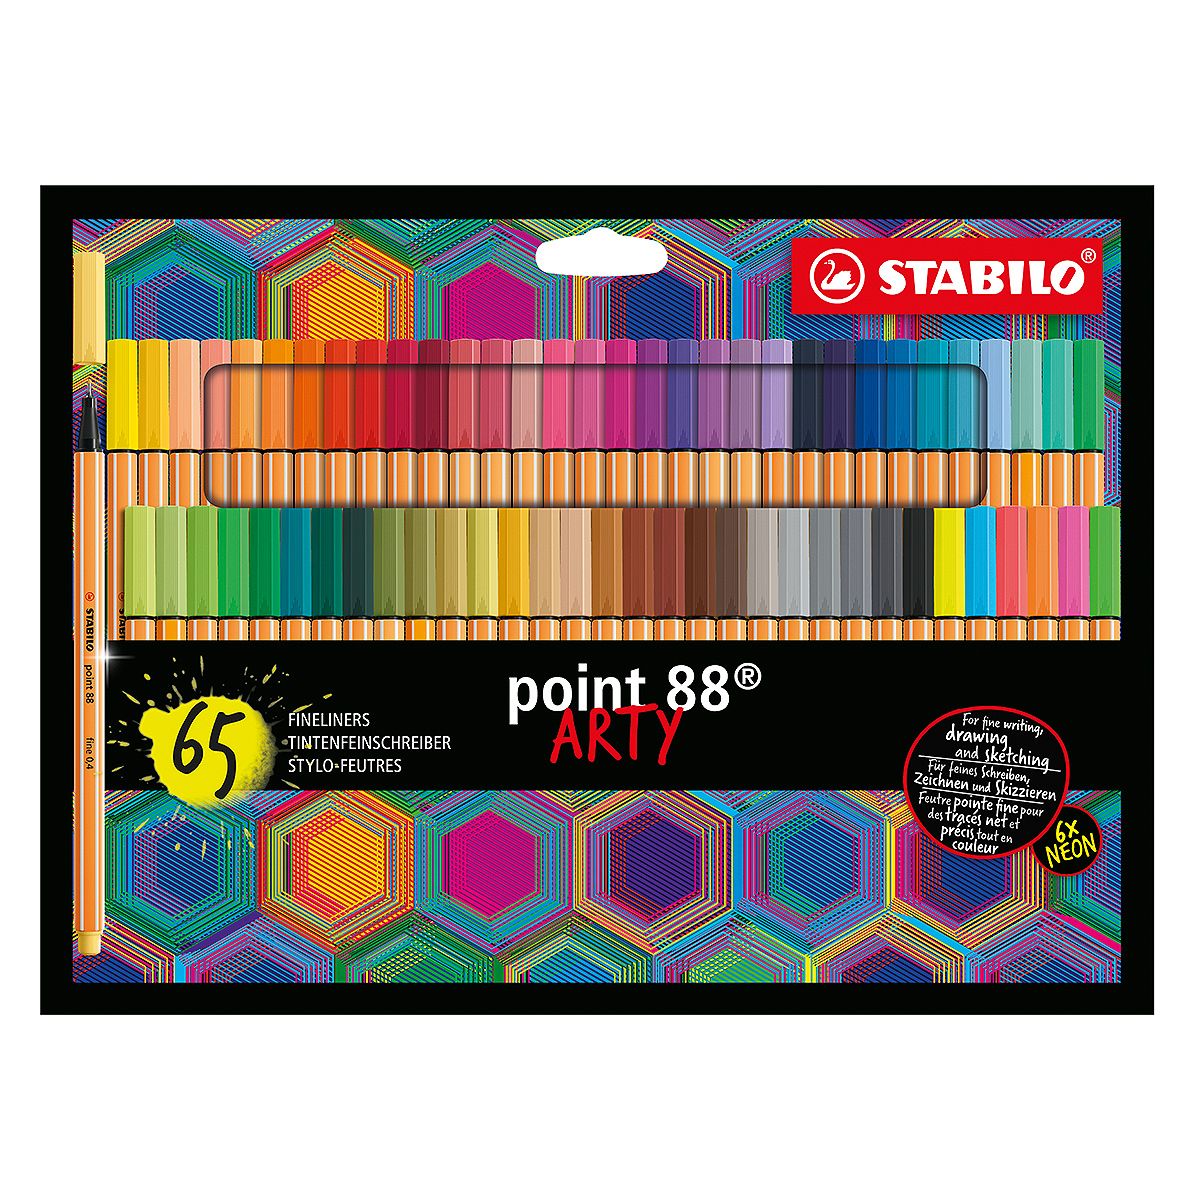 6 Packs: 20 ct. (120 total) STABILO® Point 88 Color Parade Pens